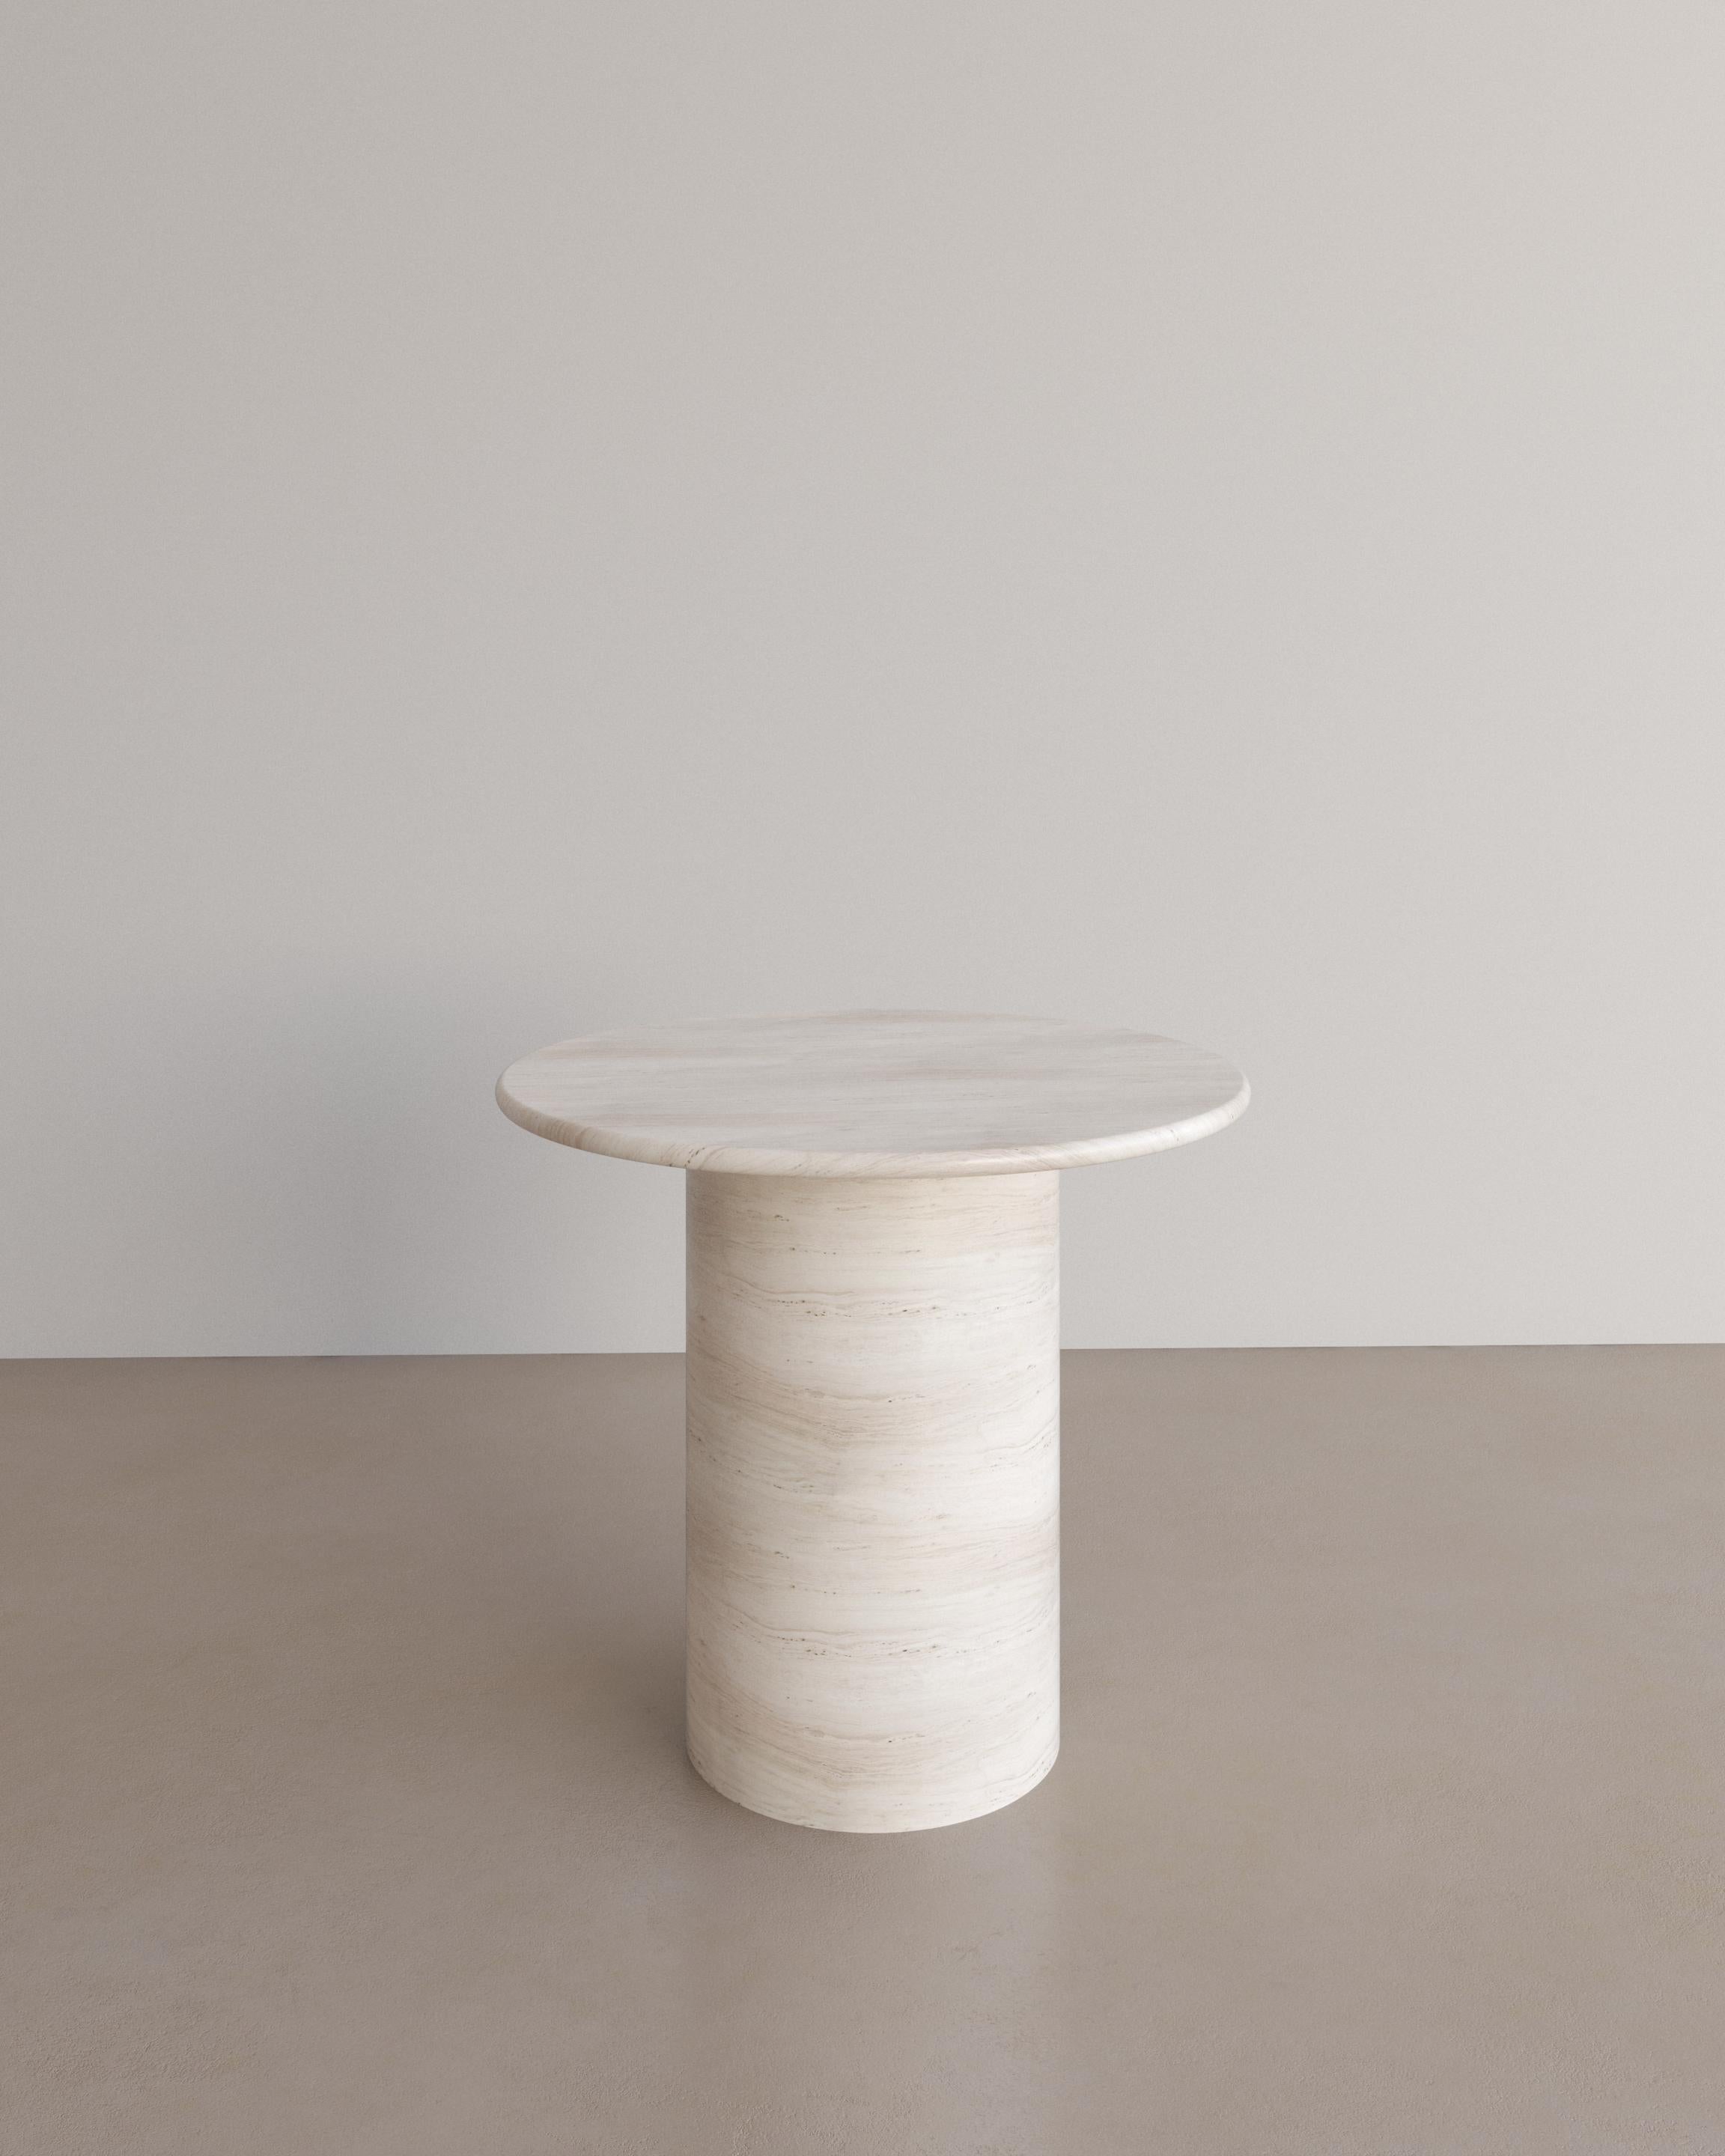 The Essentialist presents the Voyage Occasional Table I in Bianco Travertine. 
The Voyage Occasional Table I celebrates the simple pleasures that define life and replenish the soul through harnessing essential form. Envisioned as an ode to